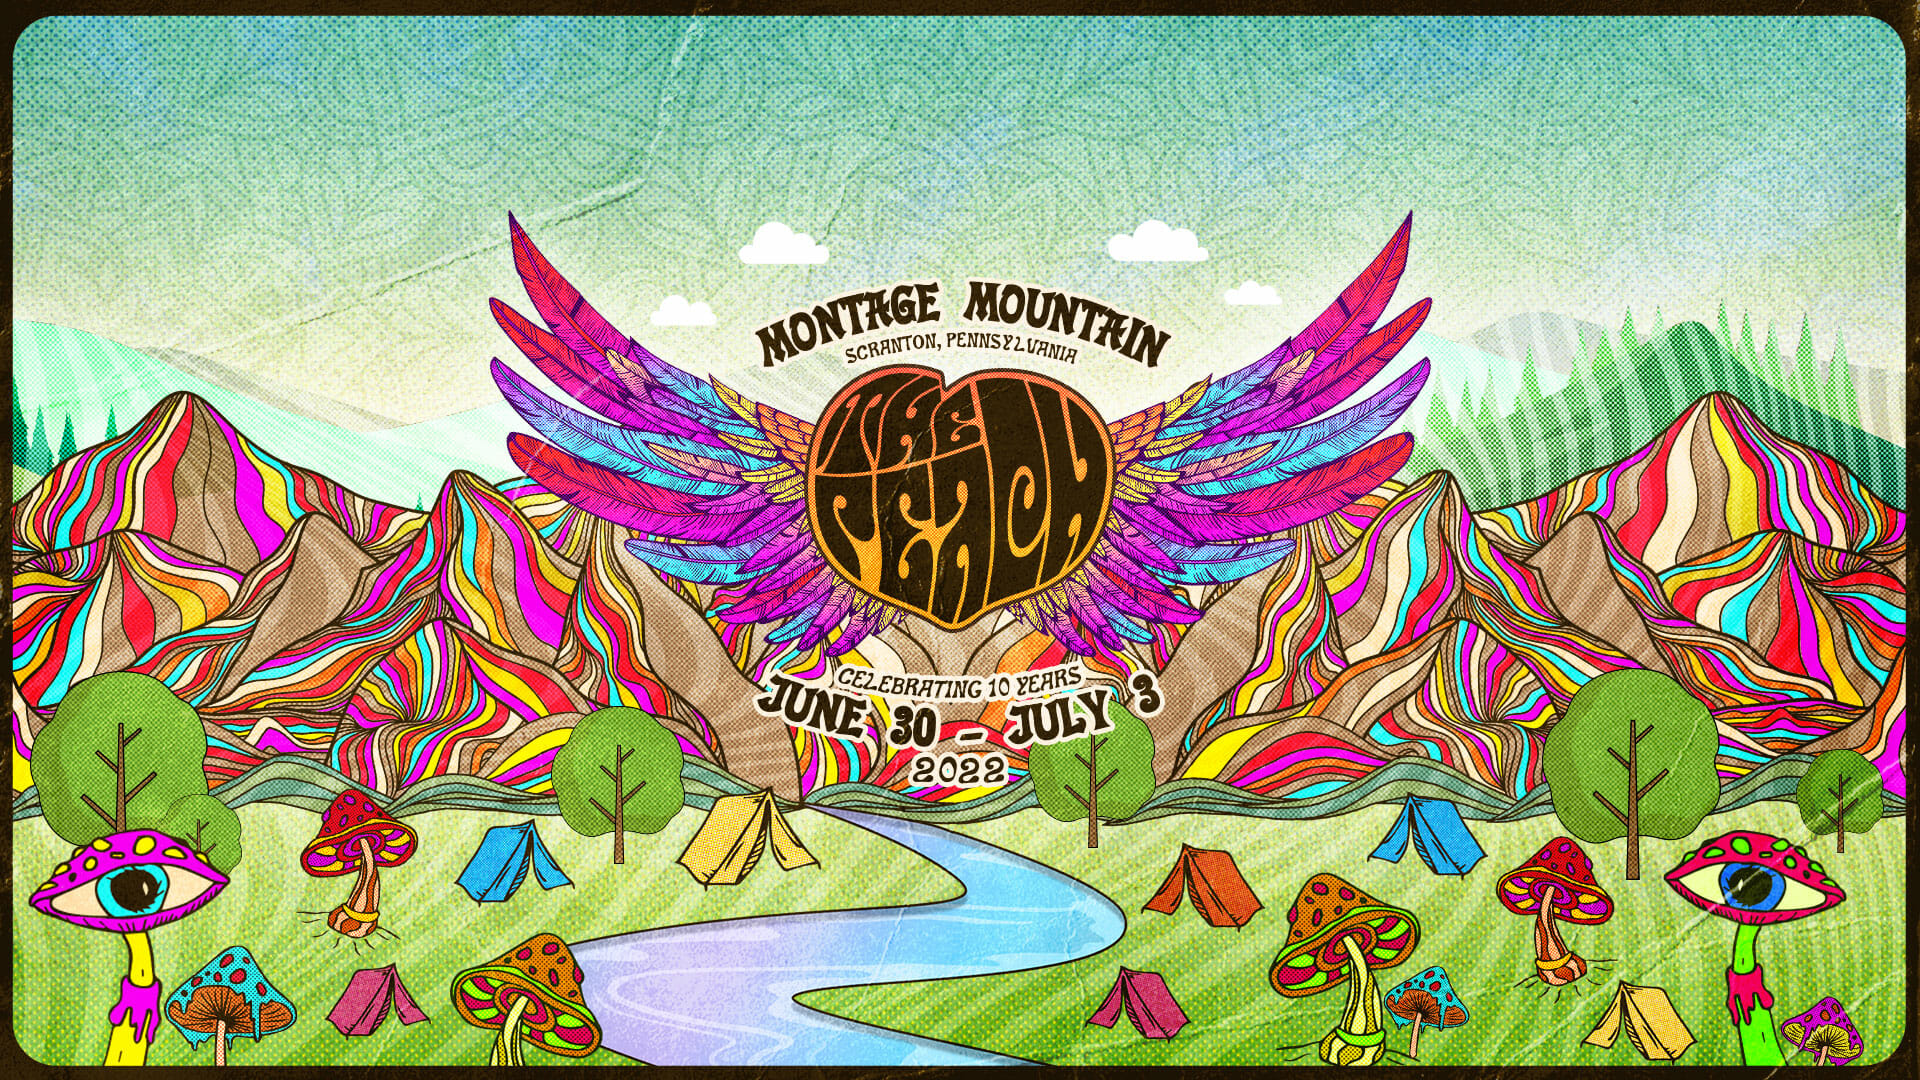 The Peach Music Festival Shares Daily Lineup Schedule